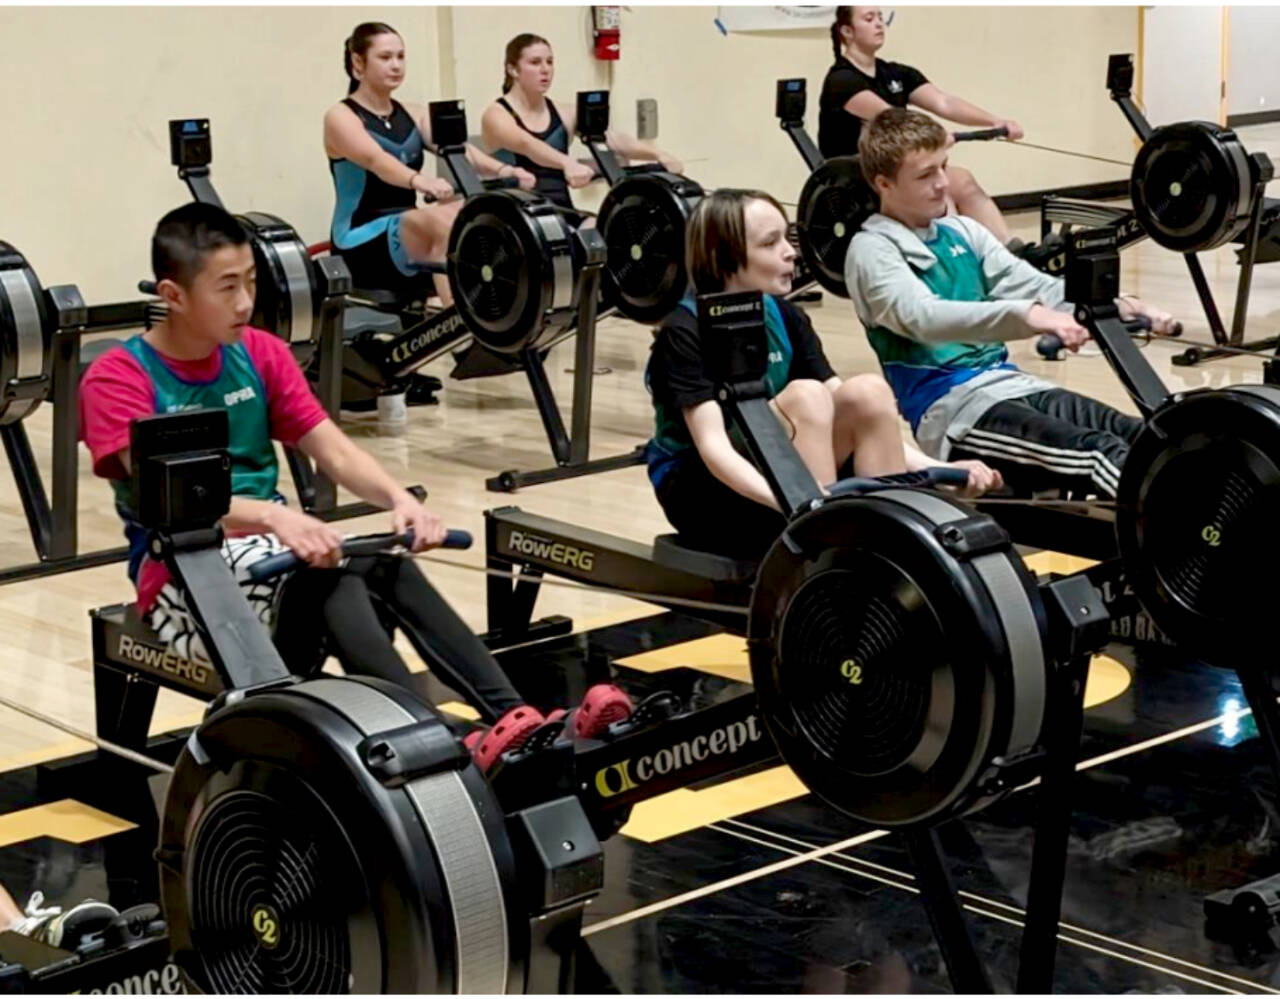 From left, Olympic Peninsula Rowing Association’s Mason Mai, 13, Quince Chanway, 12, and Teig Carlson, 14, warm up for the men’s under 15 2,000 meter indoor rowing event. (Olympic Peninsula Rowing Association)